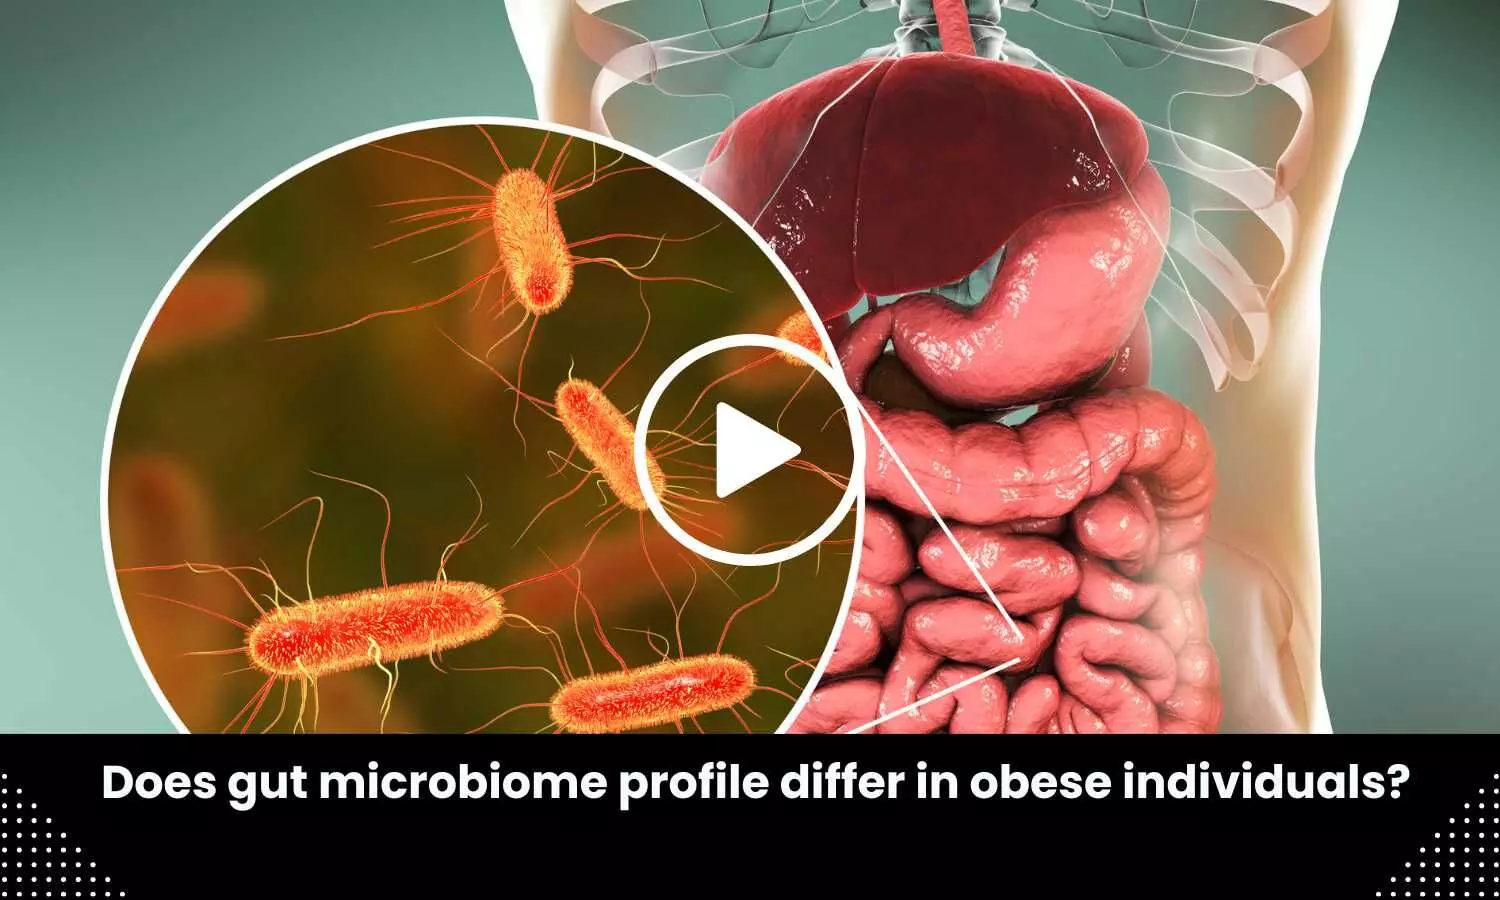 Does gut microbiome profile differ in obese individuals?